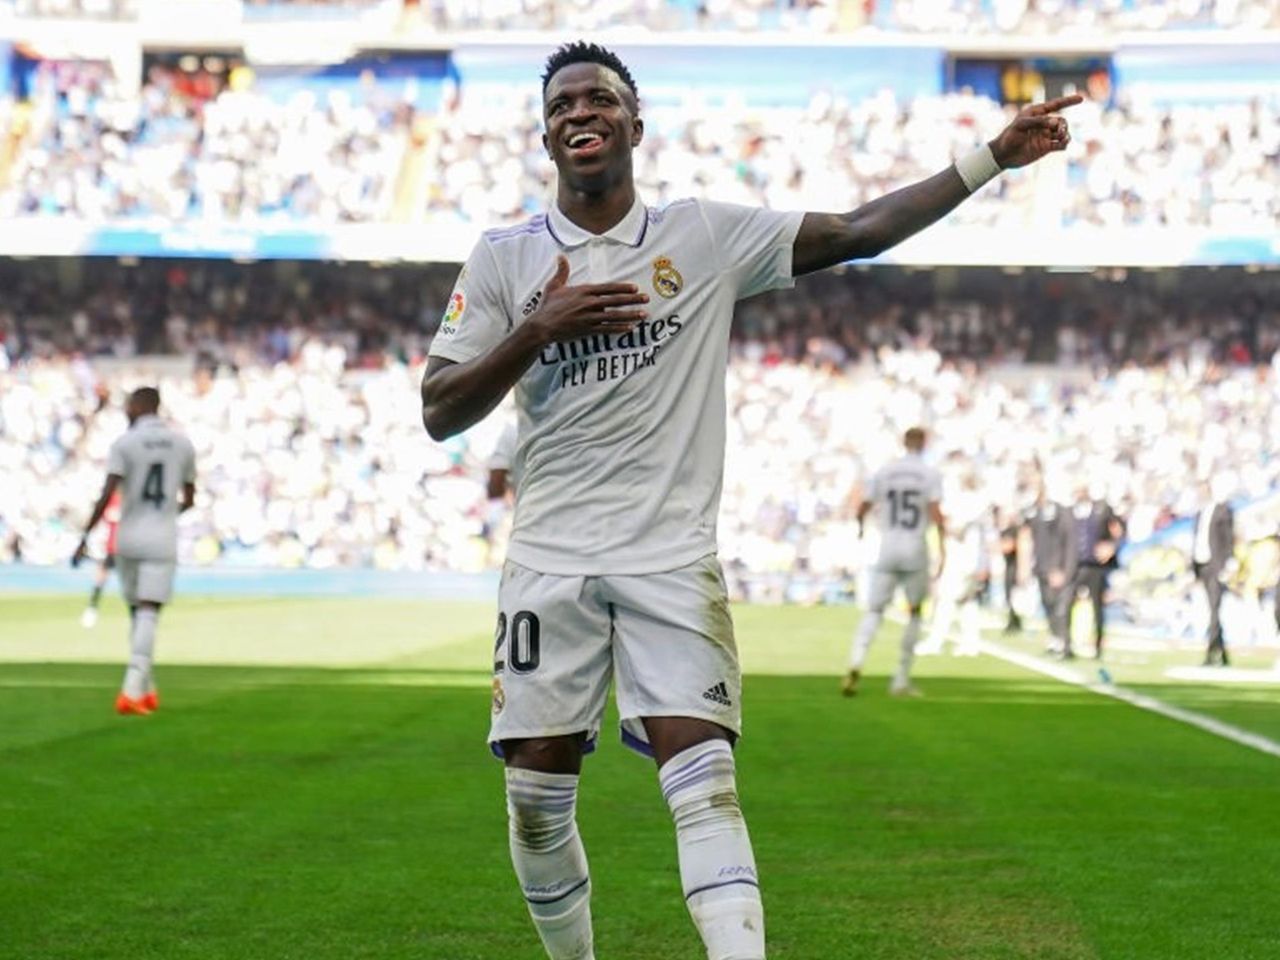 I'm not going to stop' Madrid star Vinicius Junior hits back at racist abuse and vows to keep dancing